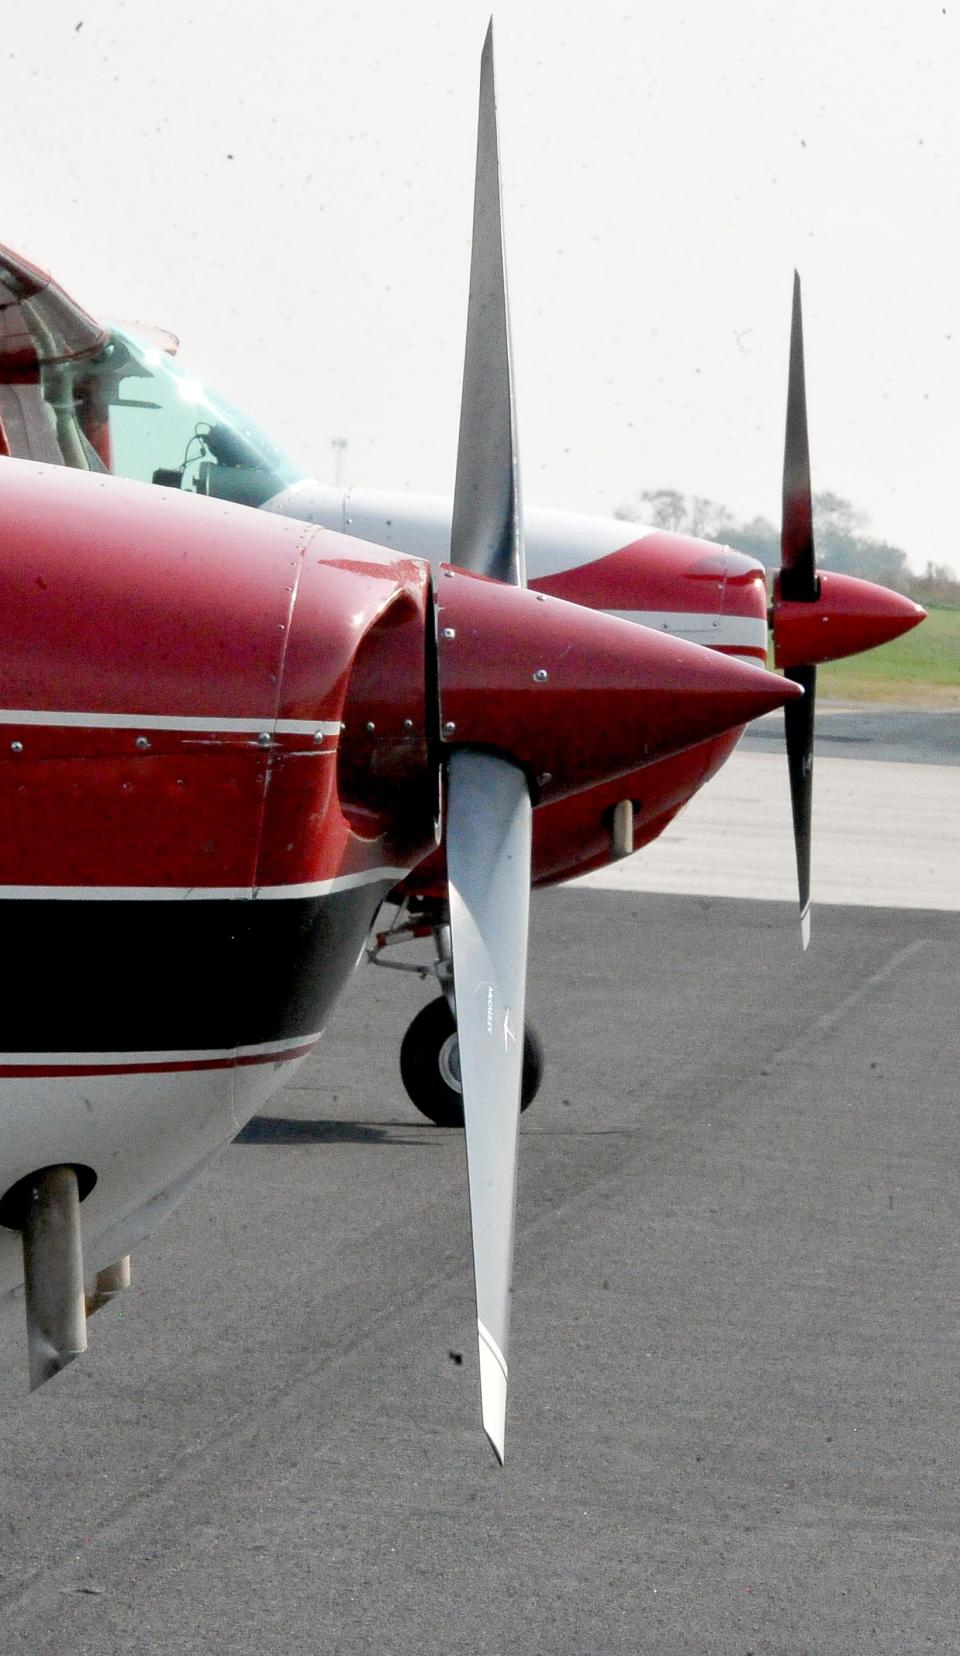 Roughly 200 aviators and pilot wannabes converged at the Wayne County Airport on Saturday for a fly-in event to encourage the aviation field as a career or as a hobby.